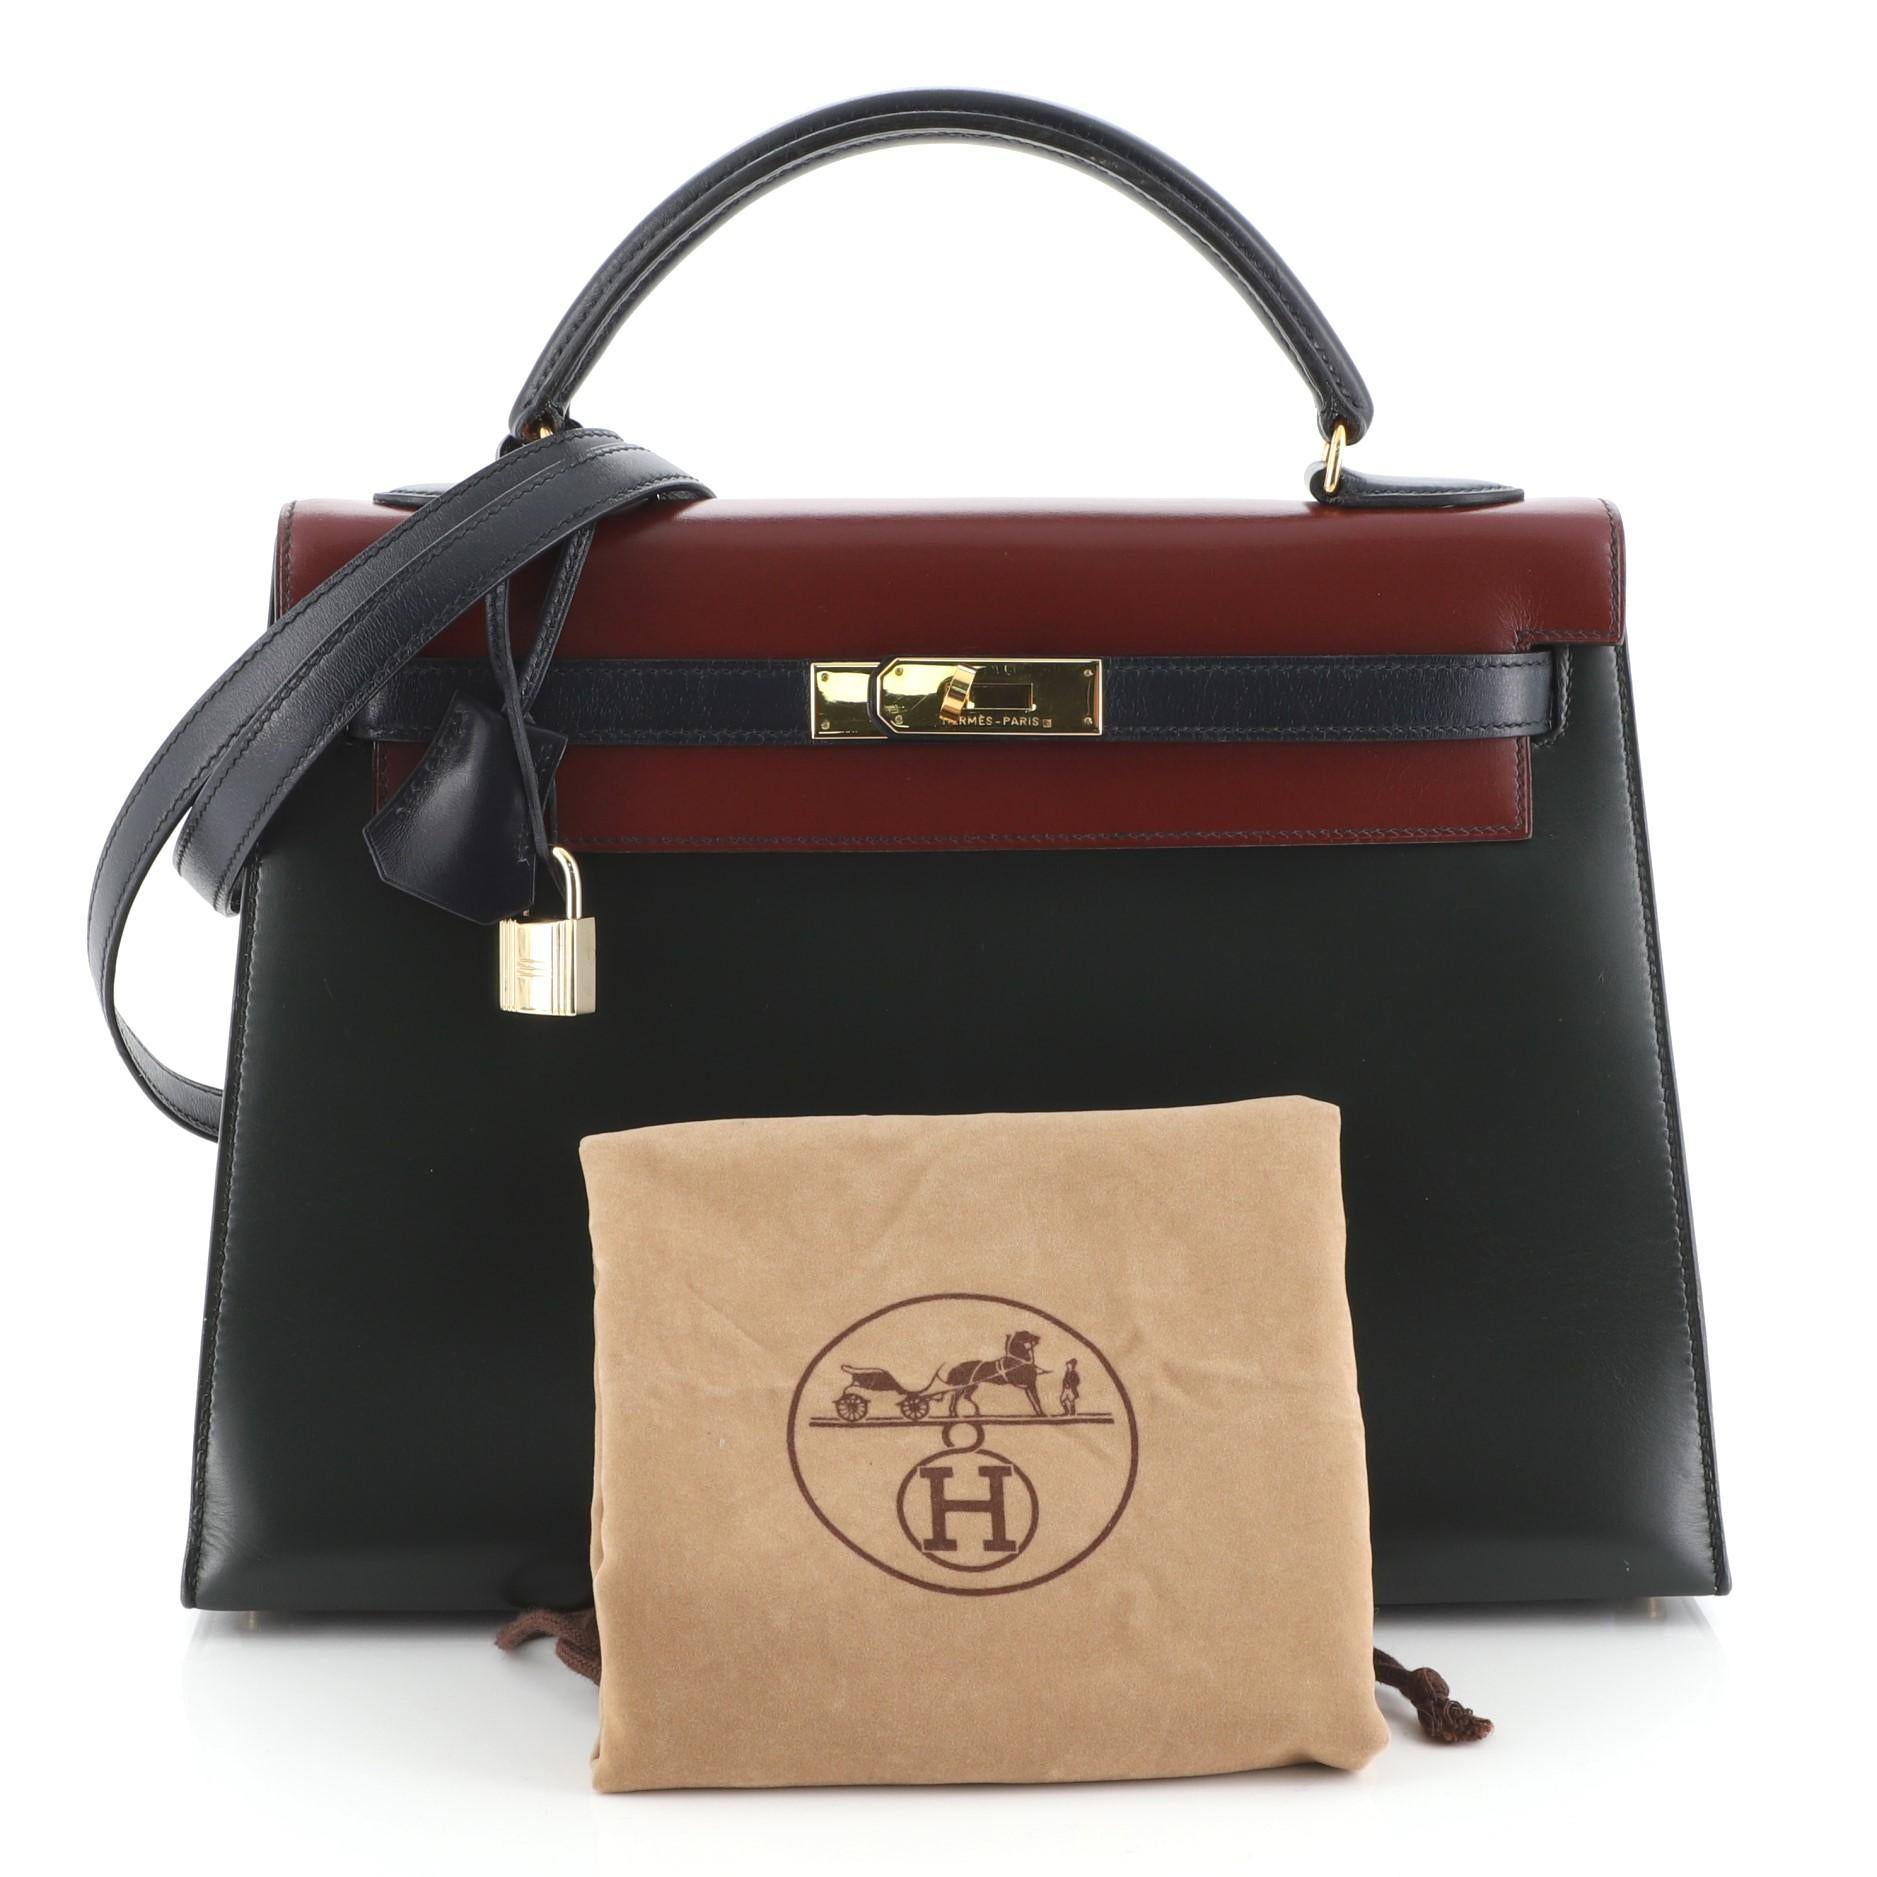 This Hermes Kelly Handbag Tricolor Box Calf with Gold Hardware 32, crafted in Rouge H red, Vert Fonce green, and Bleu Marine blue Box Calf leather, features a single top handle, protective base studs, and gold hardware. Its turn-lock closure opens